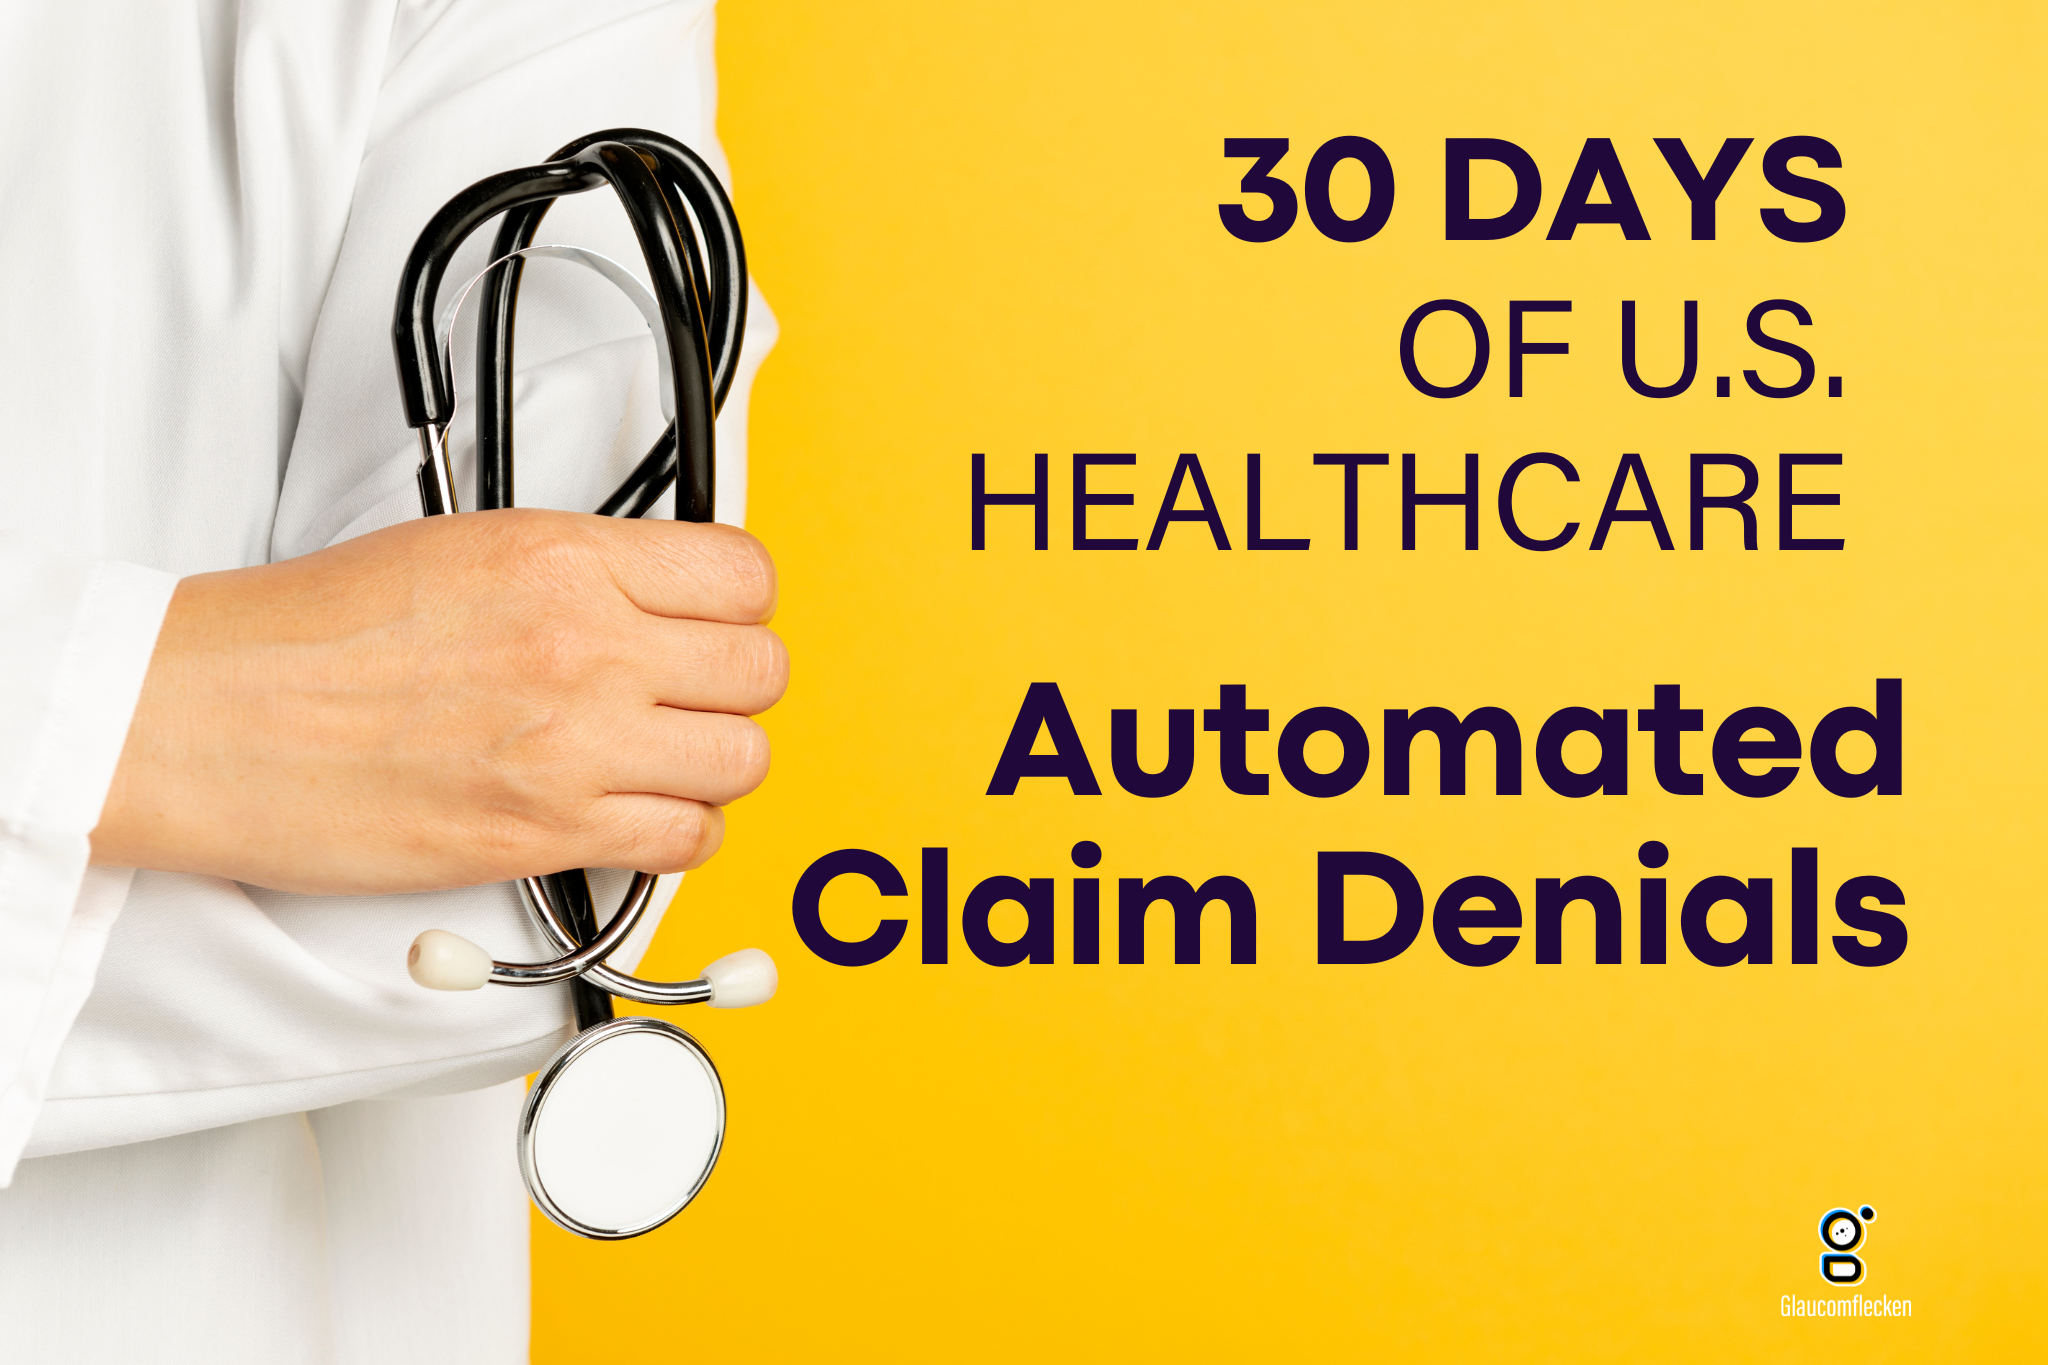 Guide to Automated Claim Denials: 3 Steps To Fight Back